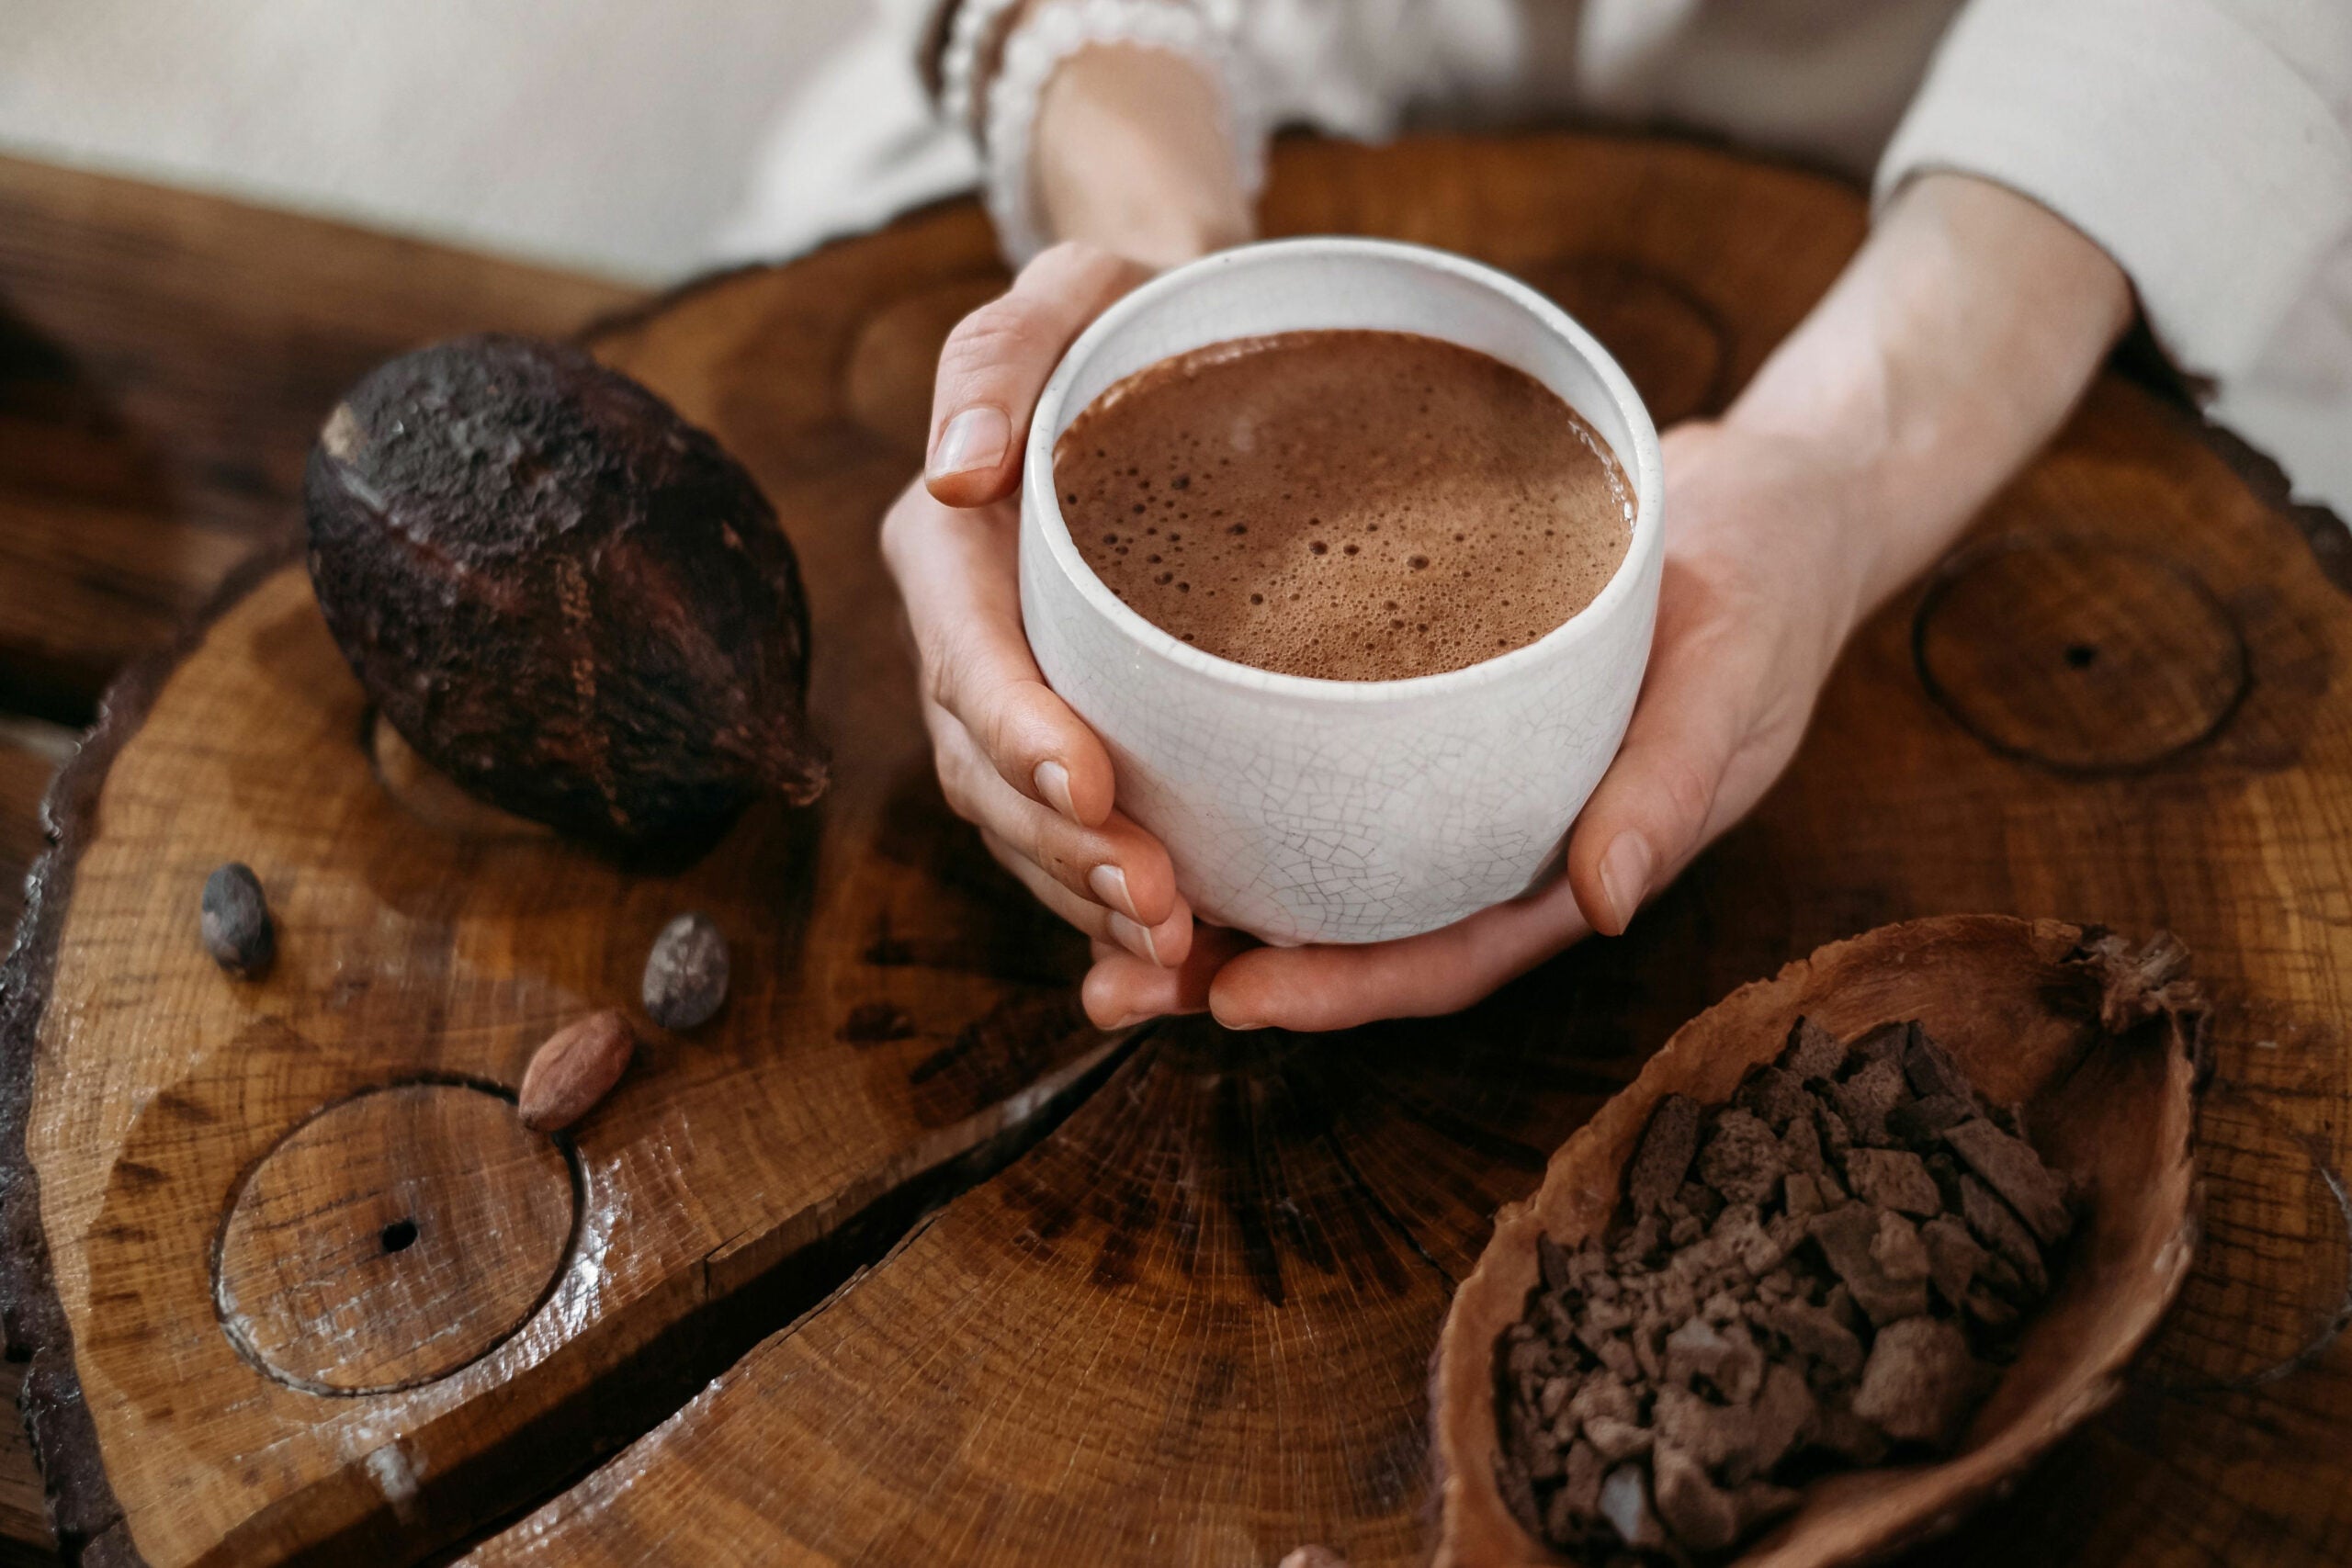 How to get started with ceremonial cacao